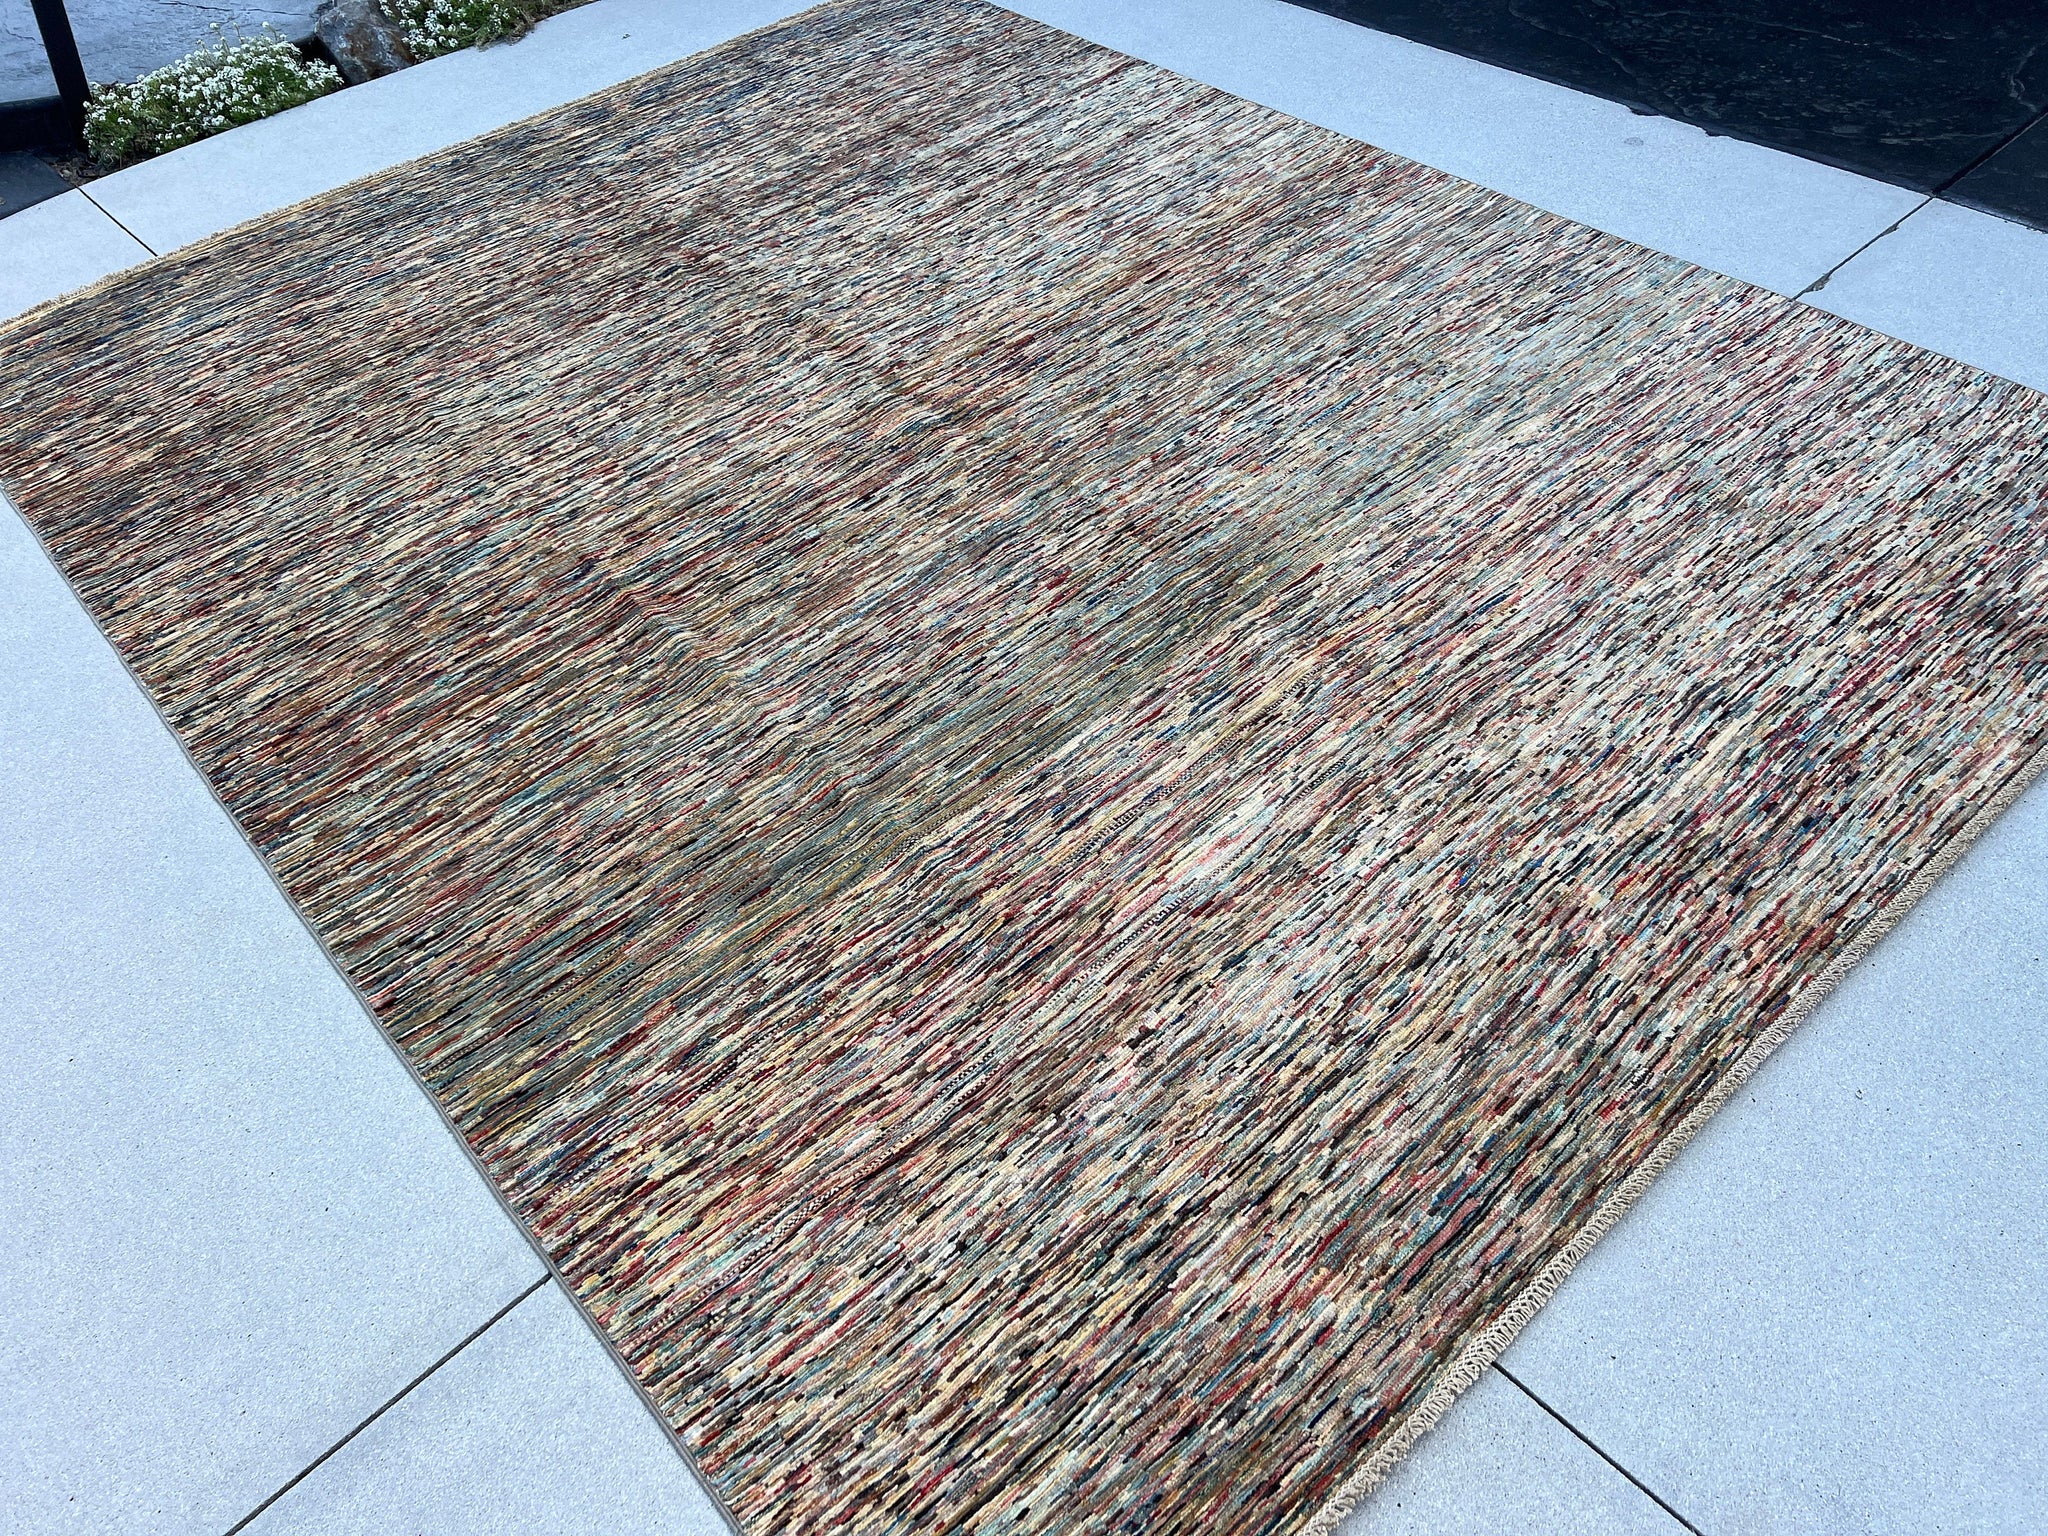 9x11 (270x300) Handmade Afghan Rug | Colorful Teal Brick Red Cream Black Burnt Orange | Wool Abstract Multicolor Striped Hand Knotted